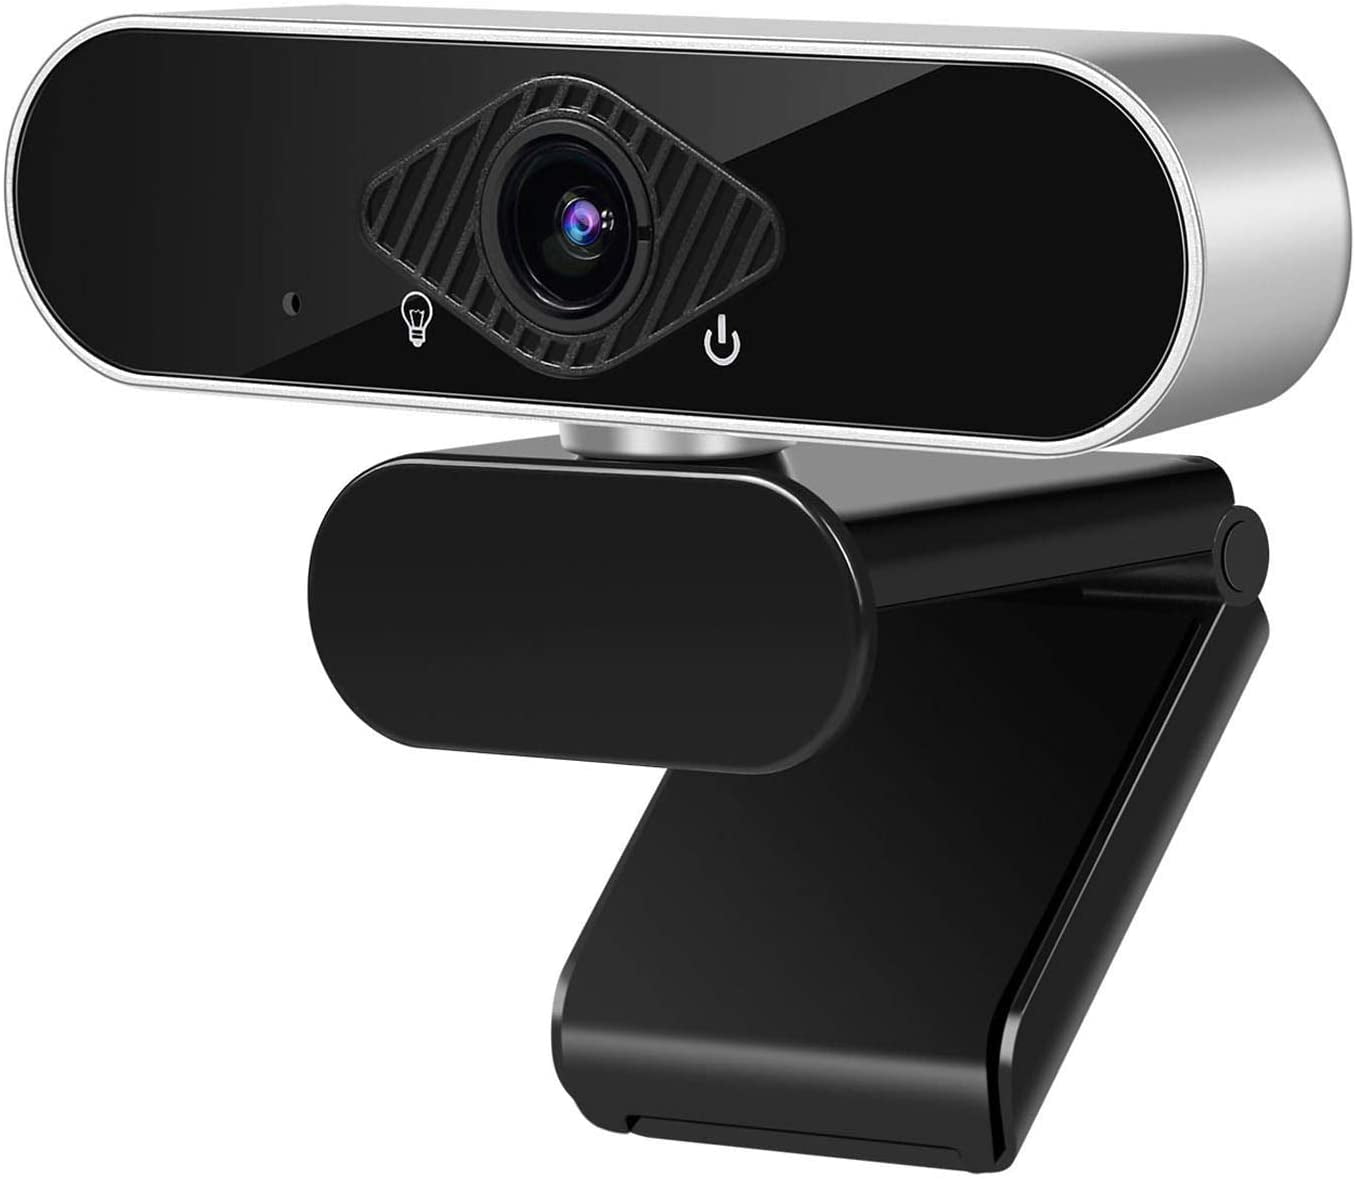 Widescreen USB Web Camera LKYBOA Computer Webcam HD 1080P with Microphone Wide Angle Streaming Camera Video Chat Call Meeting Live Broadcast 